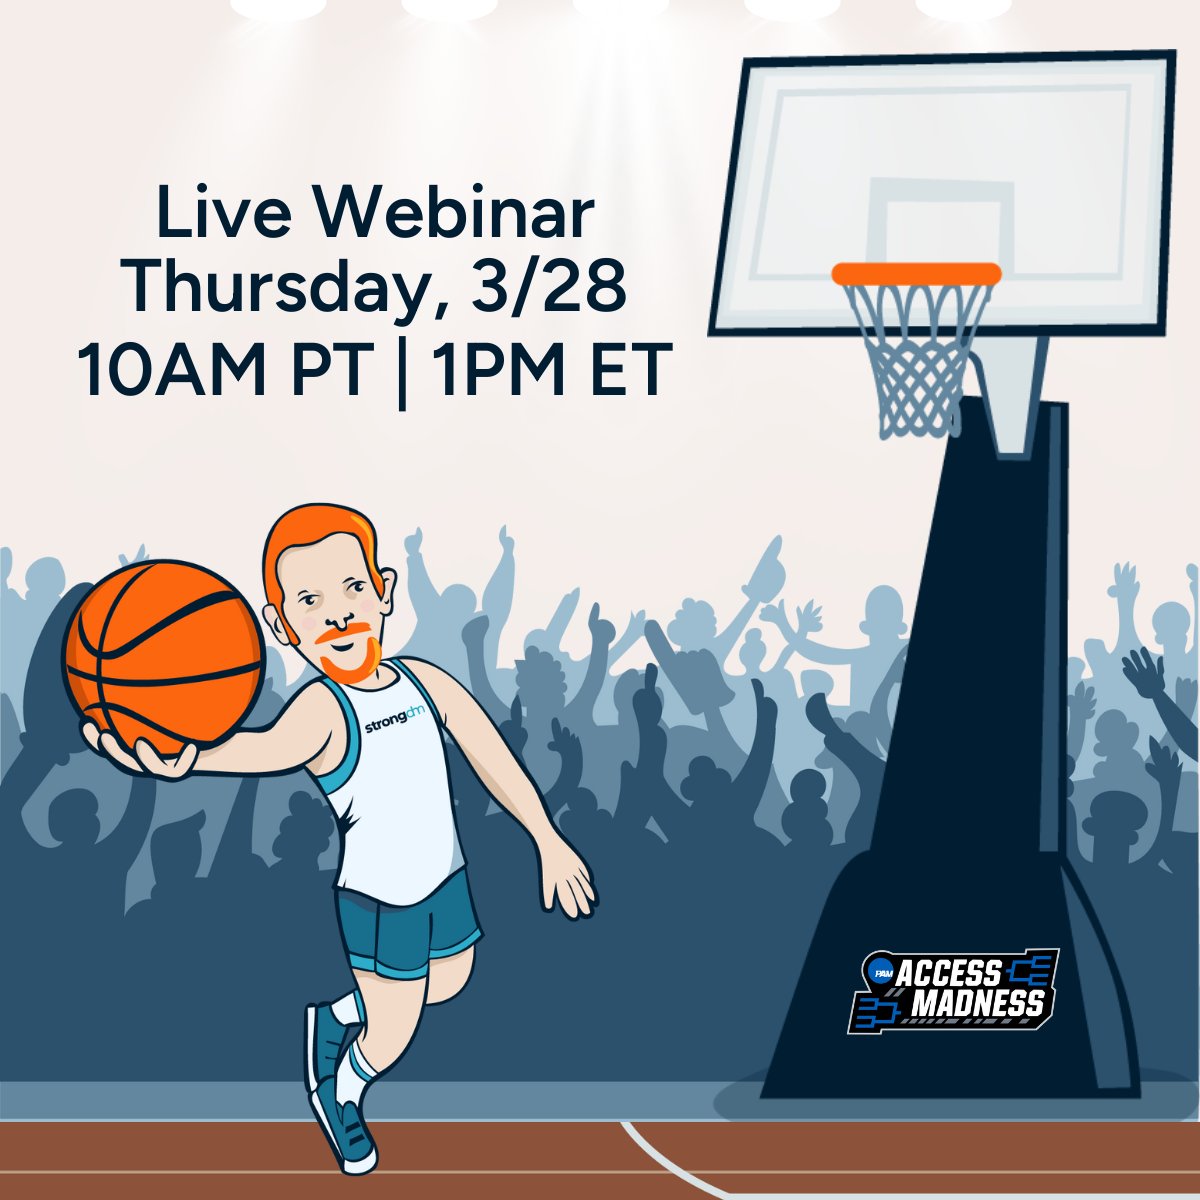 IT'S GAMEDAY. Last chance to join us: bit.ly/4a8Krh1 🏀 #infosec #PAM #accessmadness #zerotrust